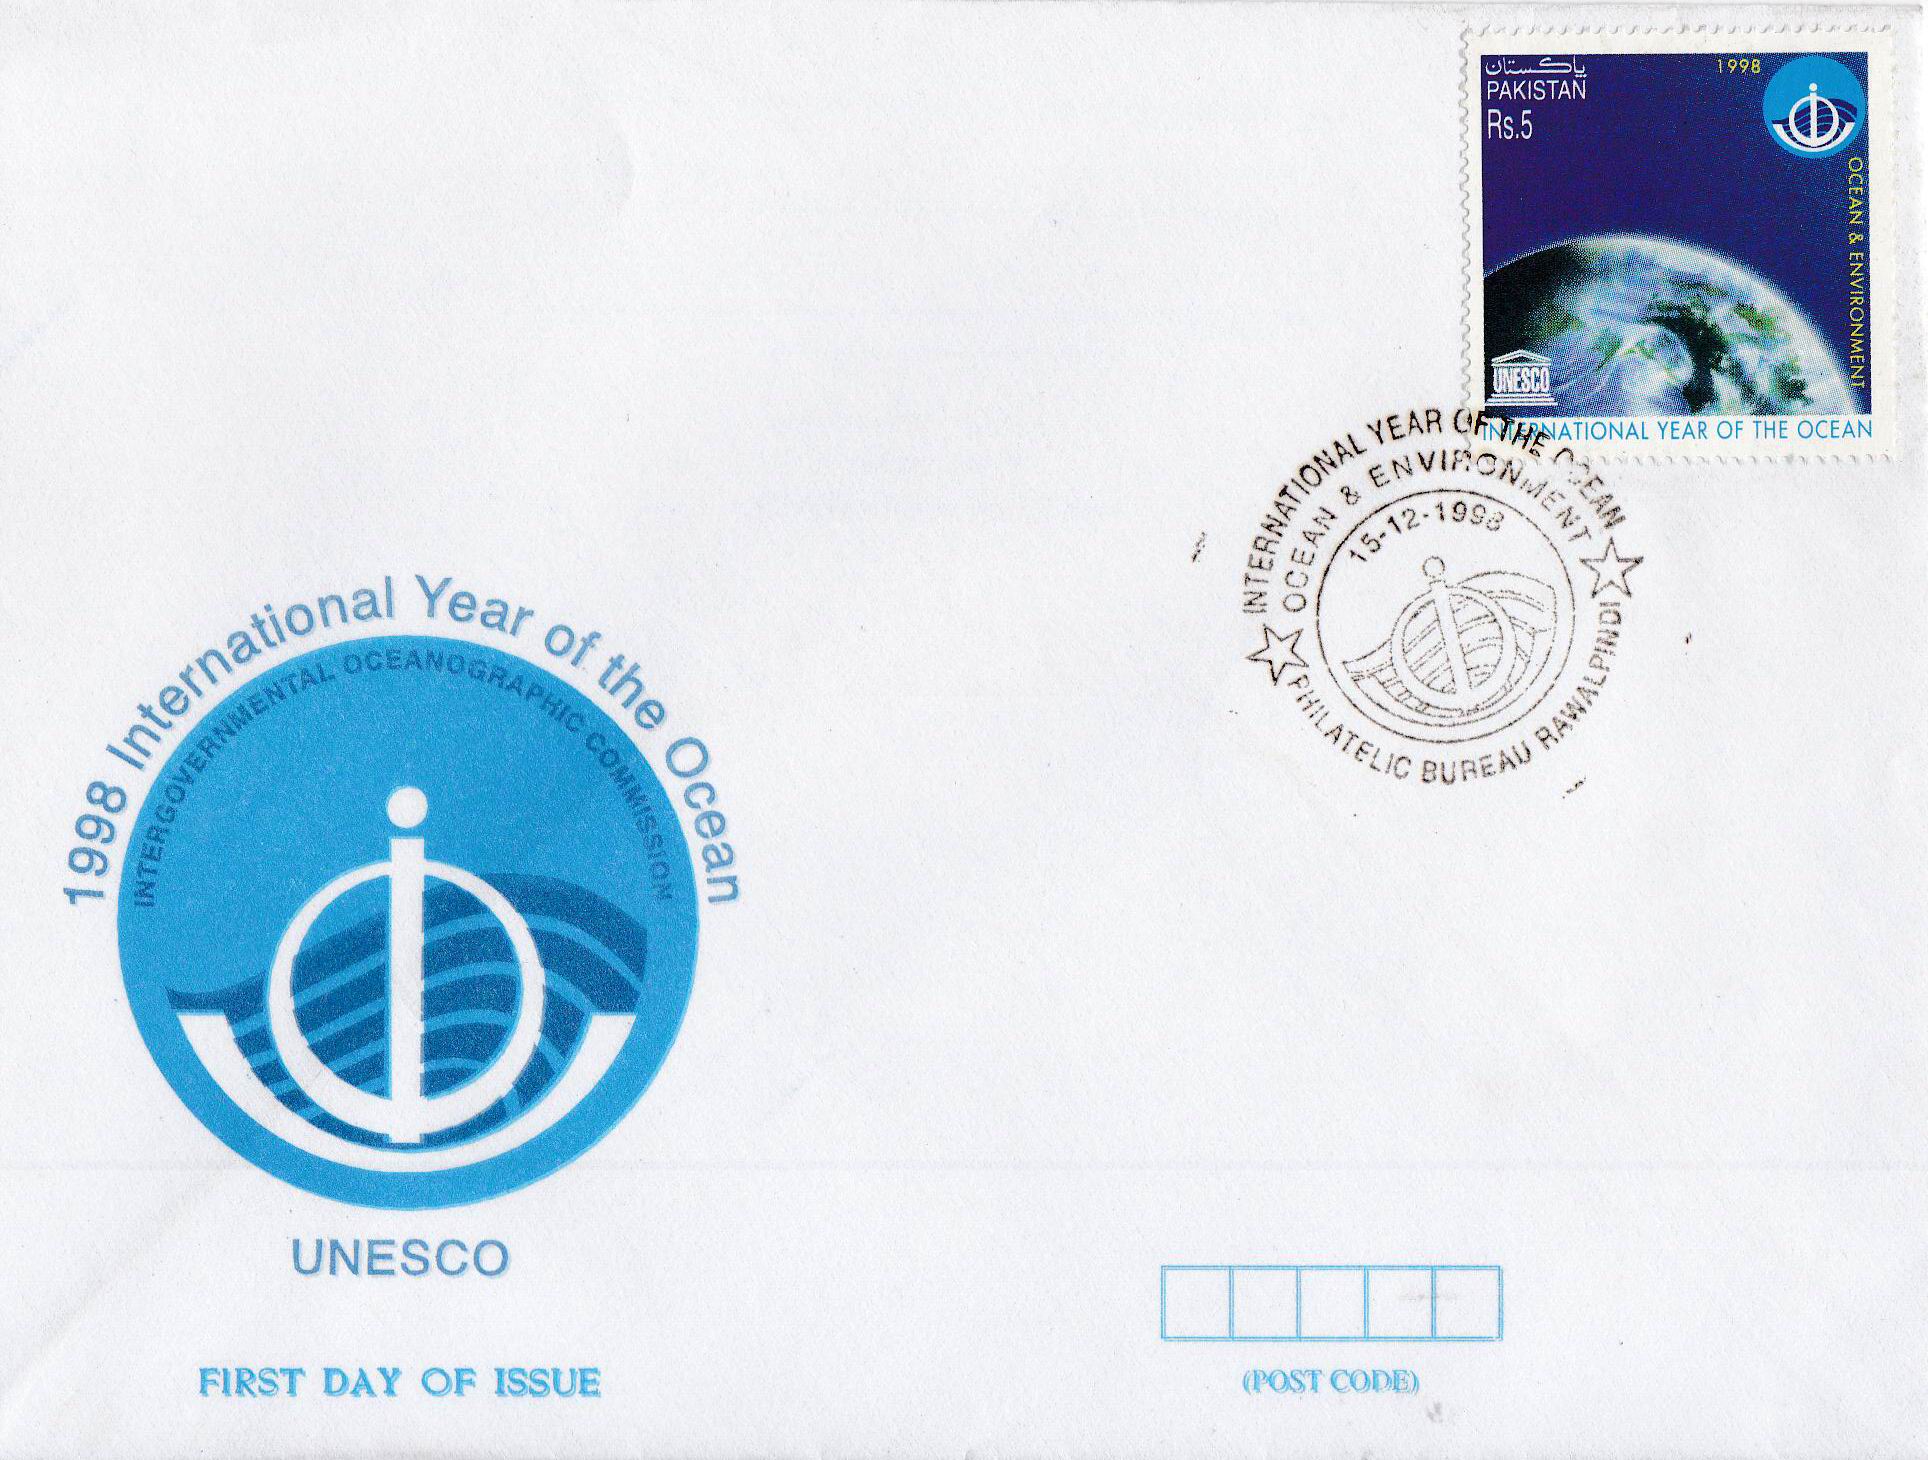 Pakistan Fdc 1998 Brochure & Stamp Year of the Ocean - Click Image to Close